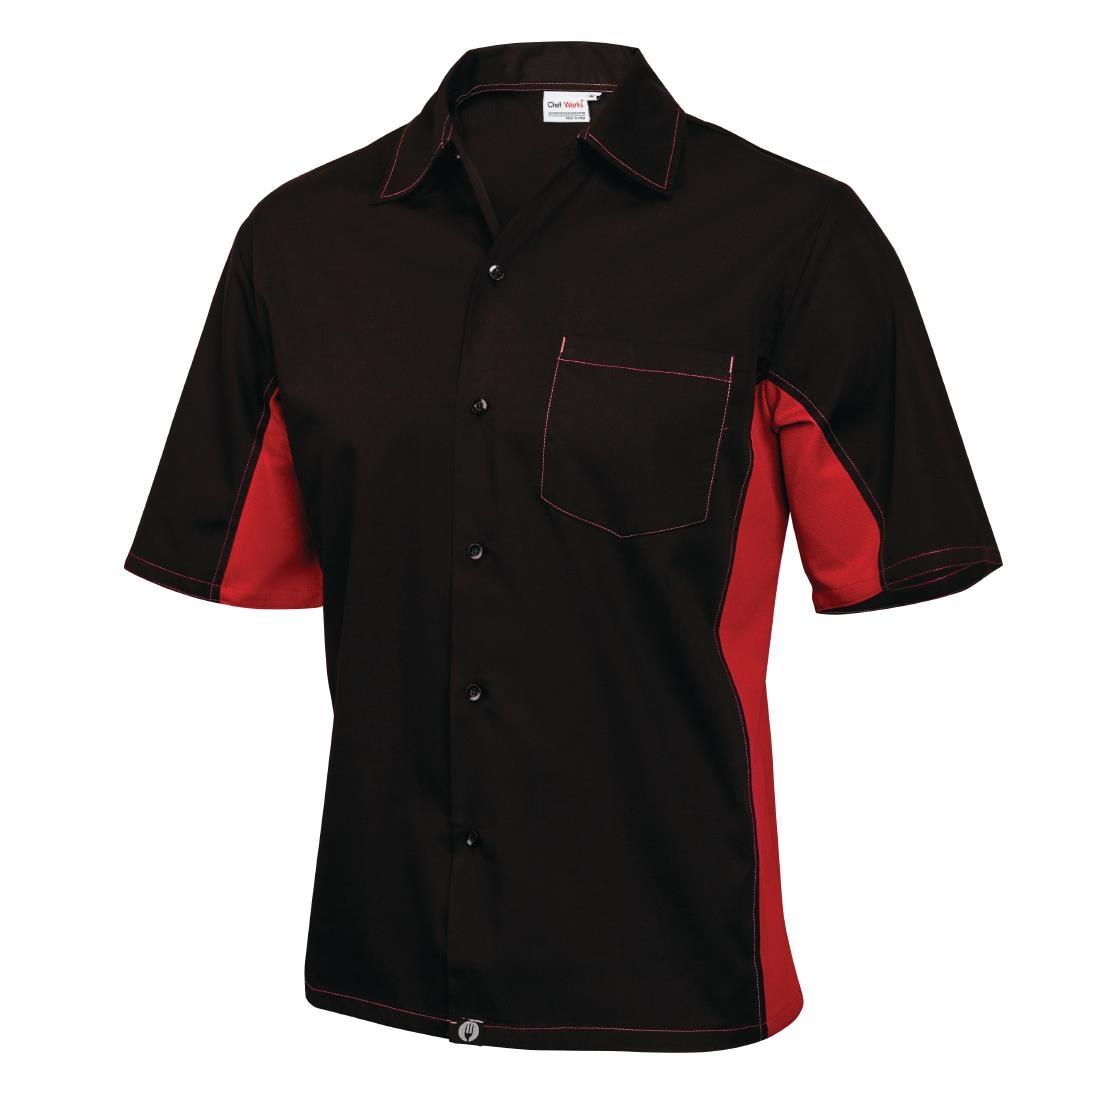 Colour by Chef Works Unisex Contrast Shirt Black and Red XS - A952-XS  - 2